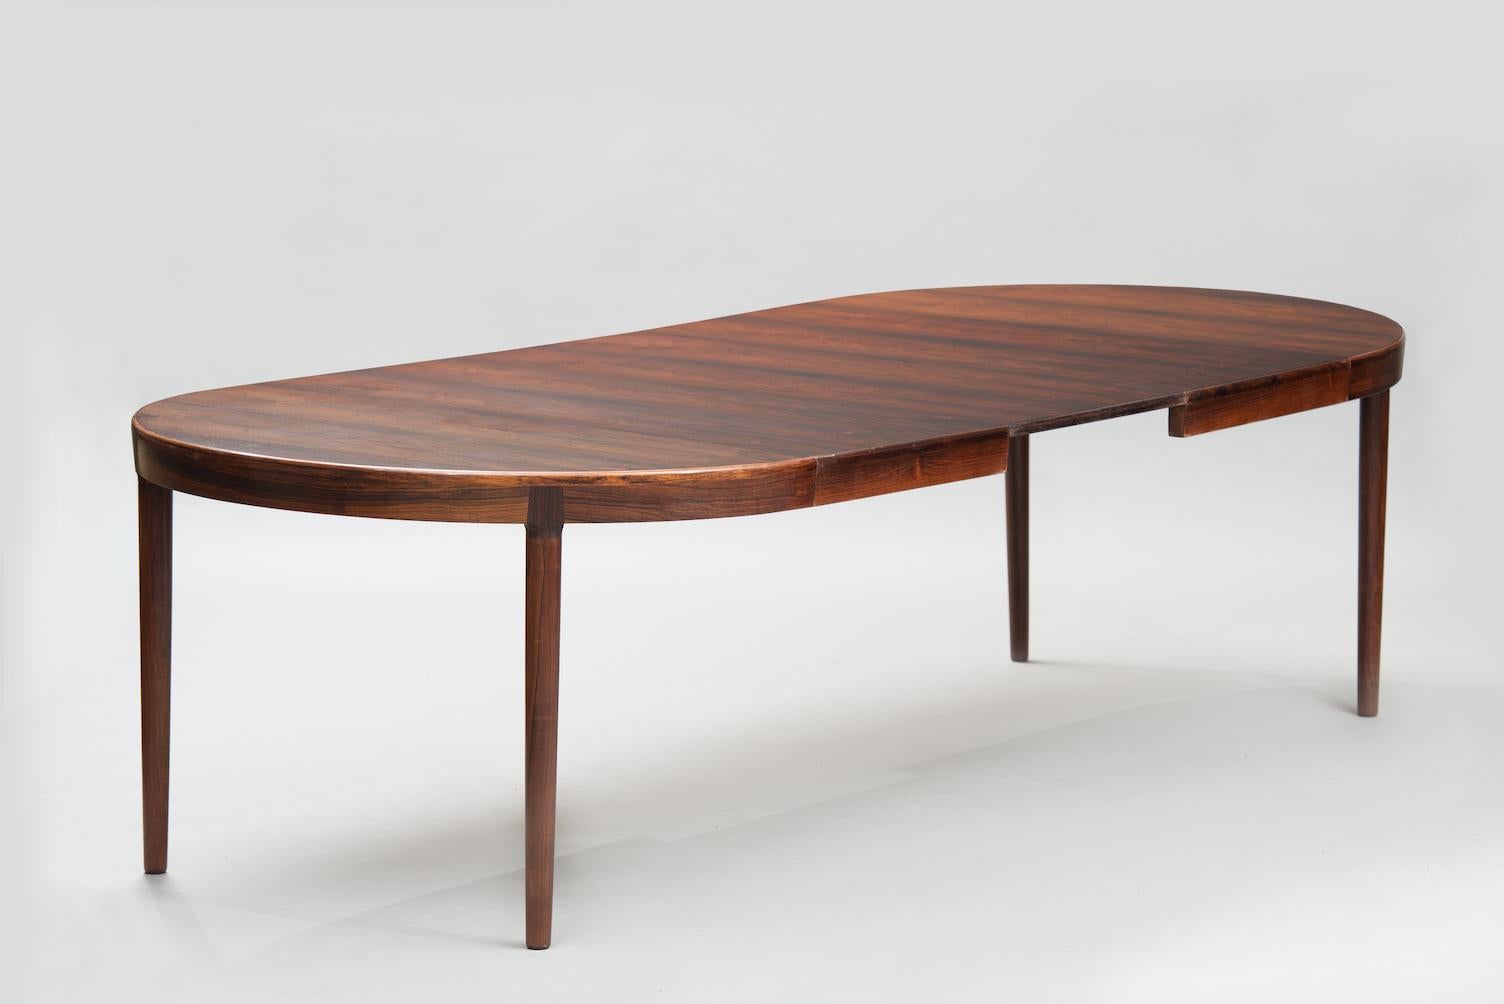 Scandinavian Modern Niels Otto Moller mid-century modern Rosewood Dining Table for J.L. Mollers 